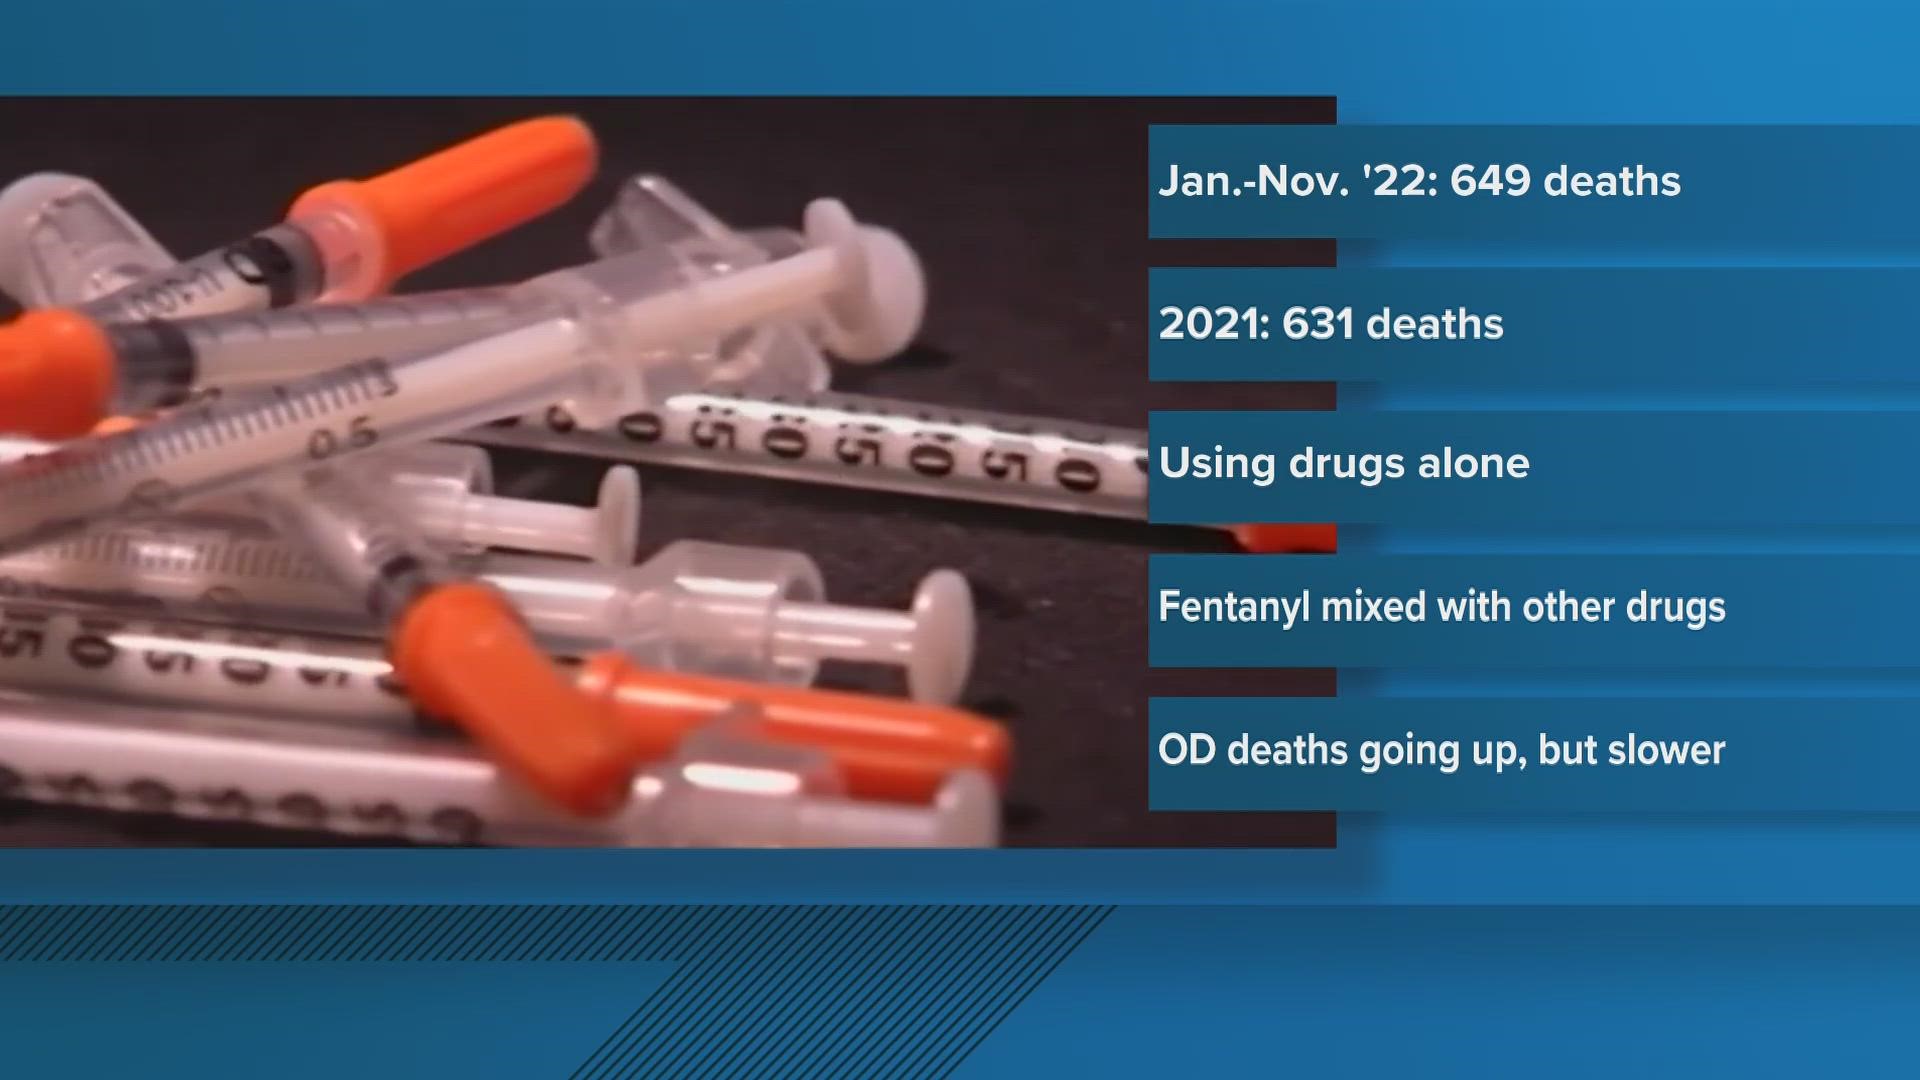 According to mainedrugdata.org, 649 people died of an overdose between January and November. In 2021, the total number of overdose fatalities for the year was 631.